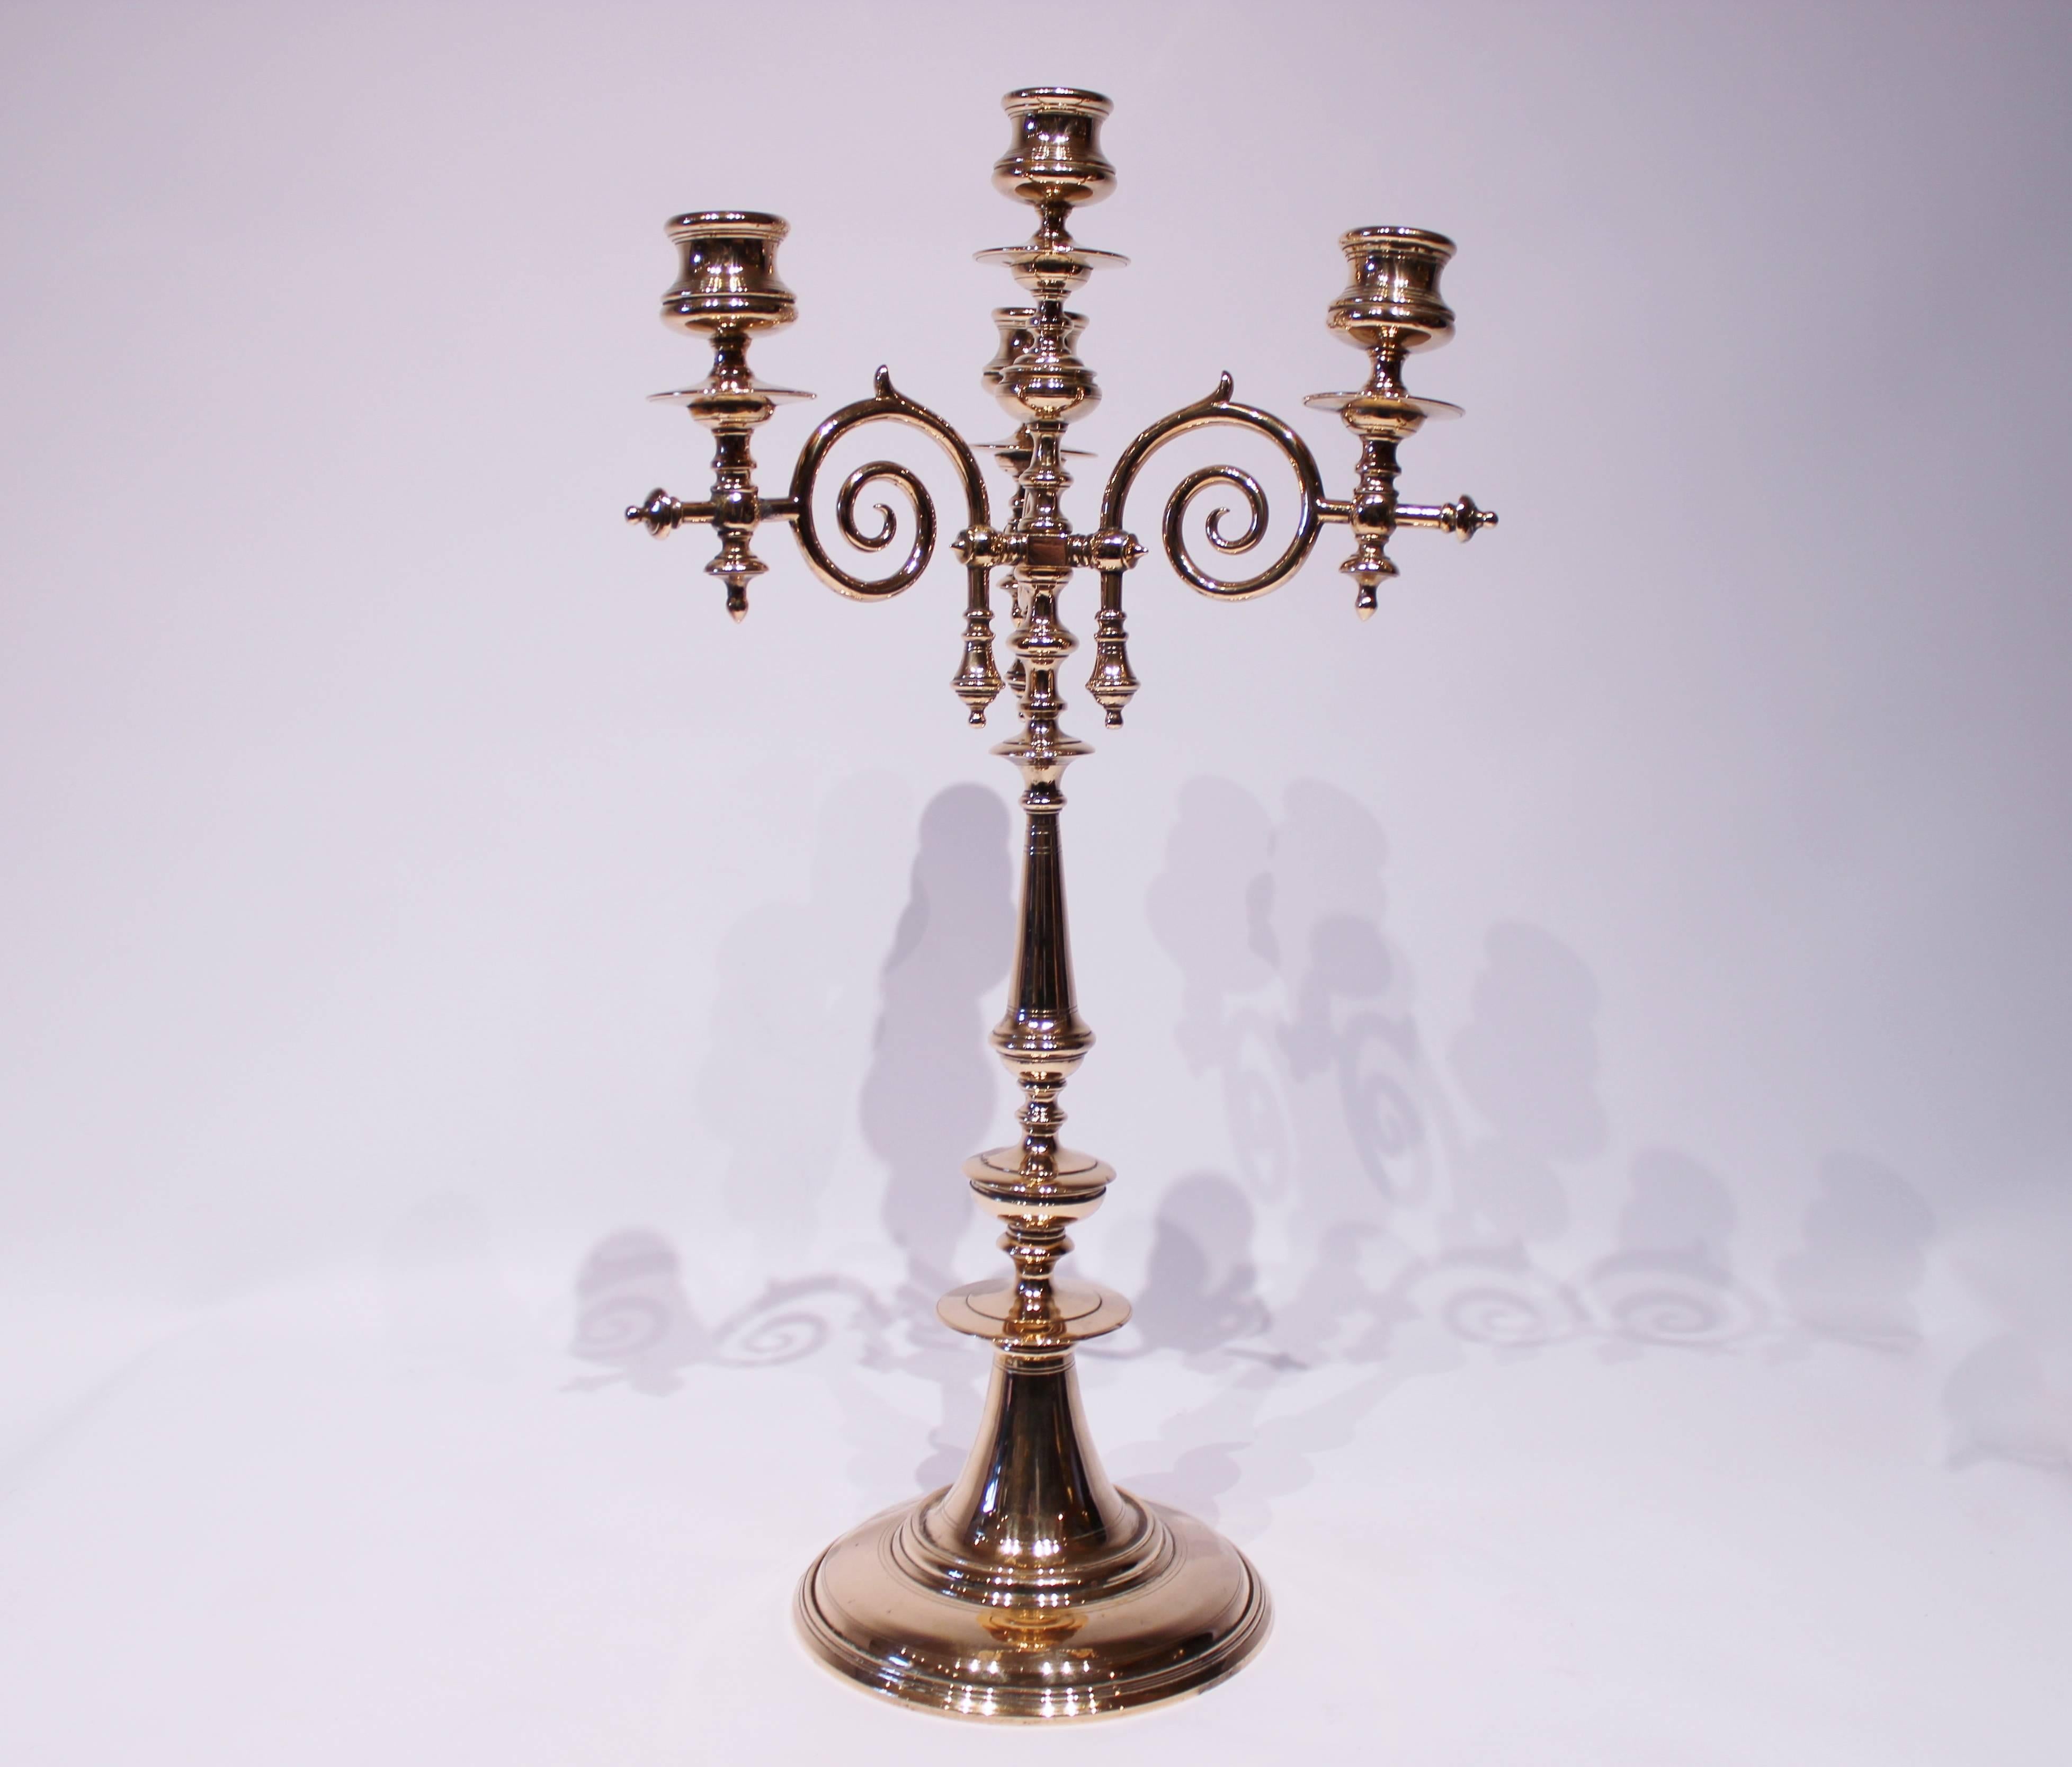 Other Pair of Tall Four-Armed Brass Candlesticks, circa 1880s